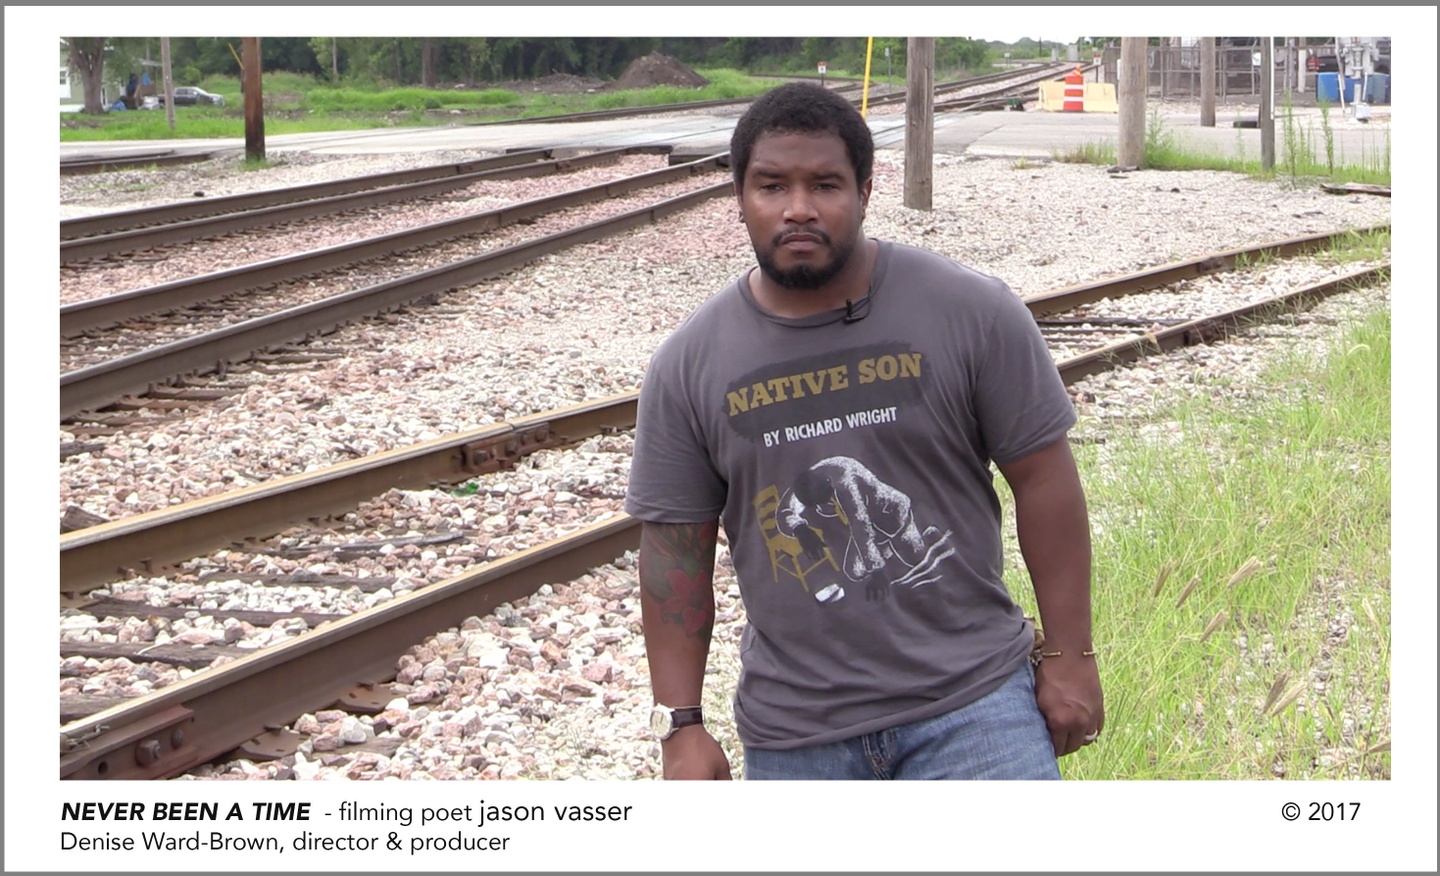 Text reads, "NEVER BEEN A TIME - filming poet jason vasser", below a still from the video, in which vasser stands in front of railroad tracks, wearing a graphic tee that reads, "NATIVE SON BY RICHARD WRIGHT".